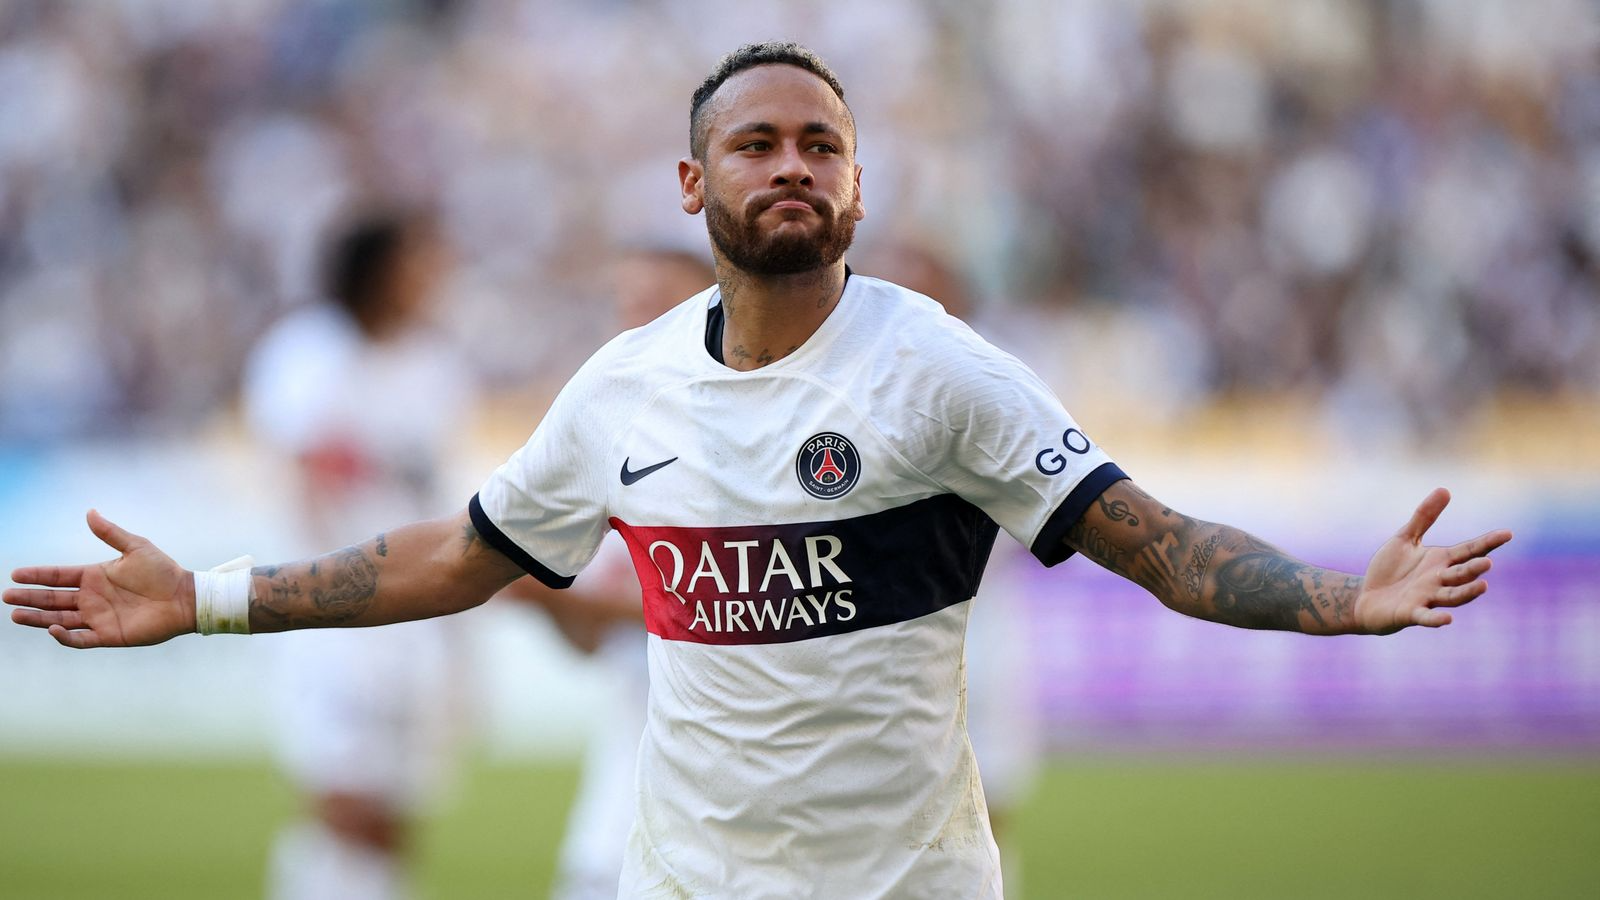 Journalist Andrade: Al-Hilal To Announce Neymar's Transfer On August 15